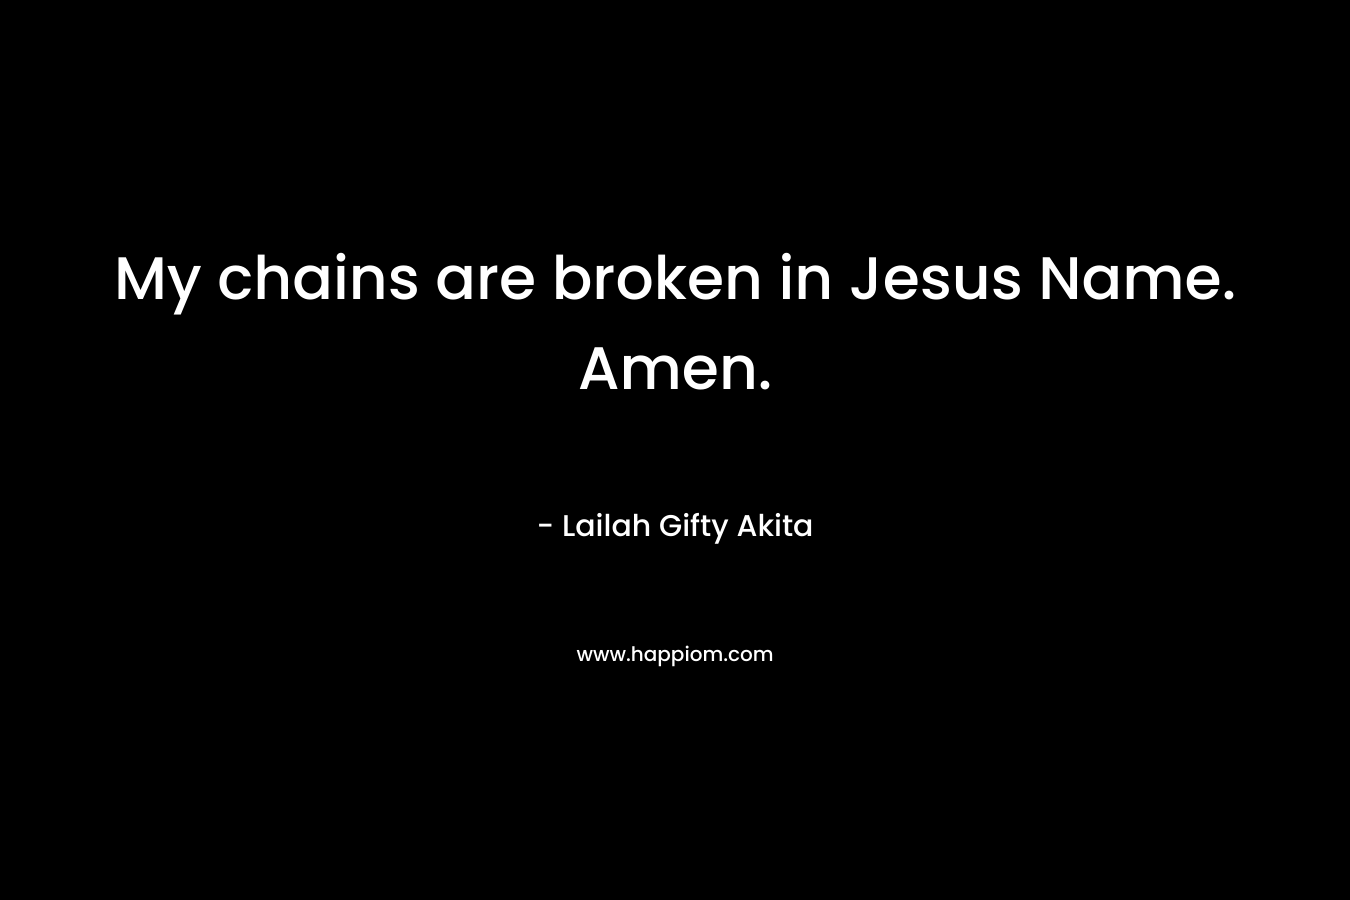 My chains are broken in Jesus Name. Amen. – Lailah Gifty Akita